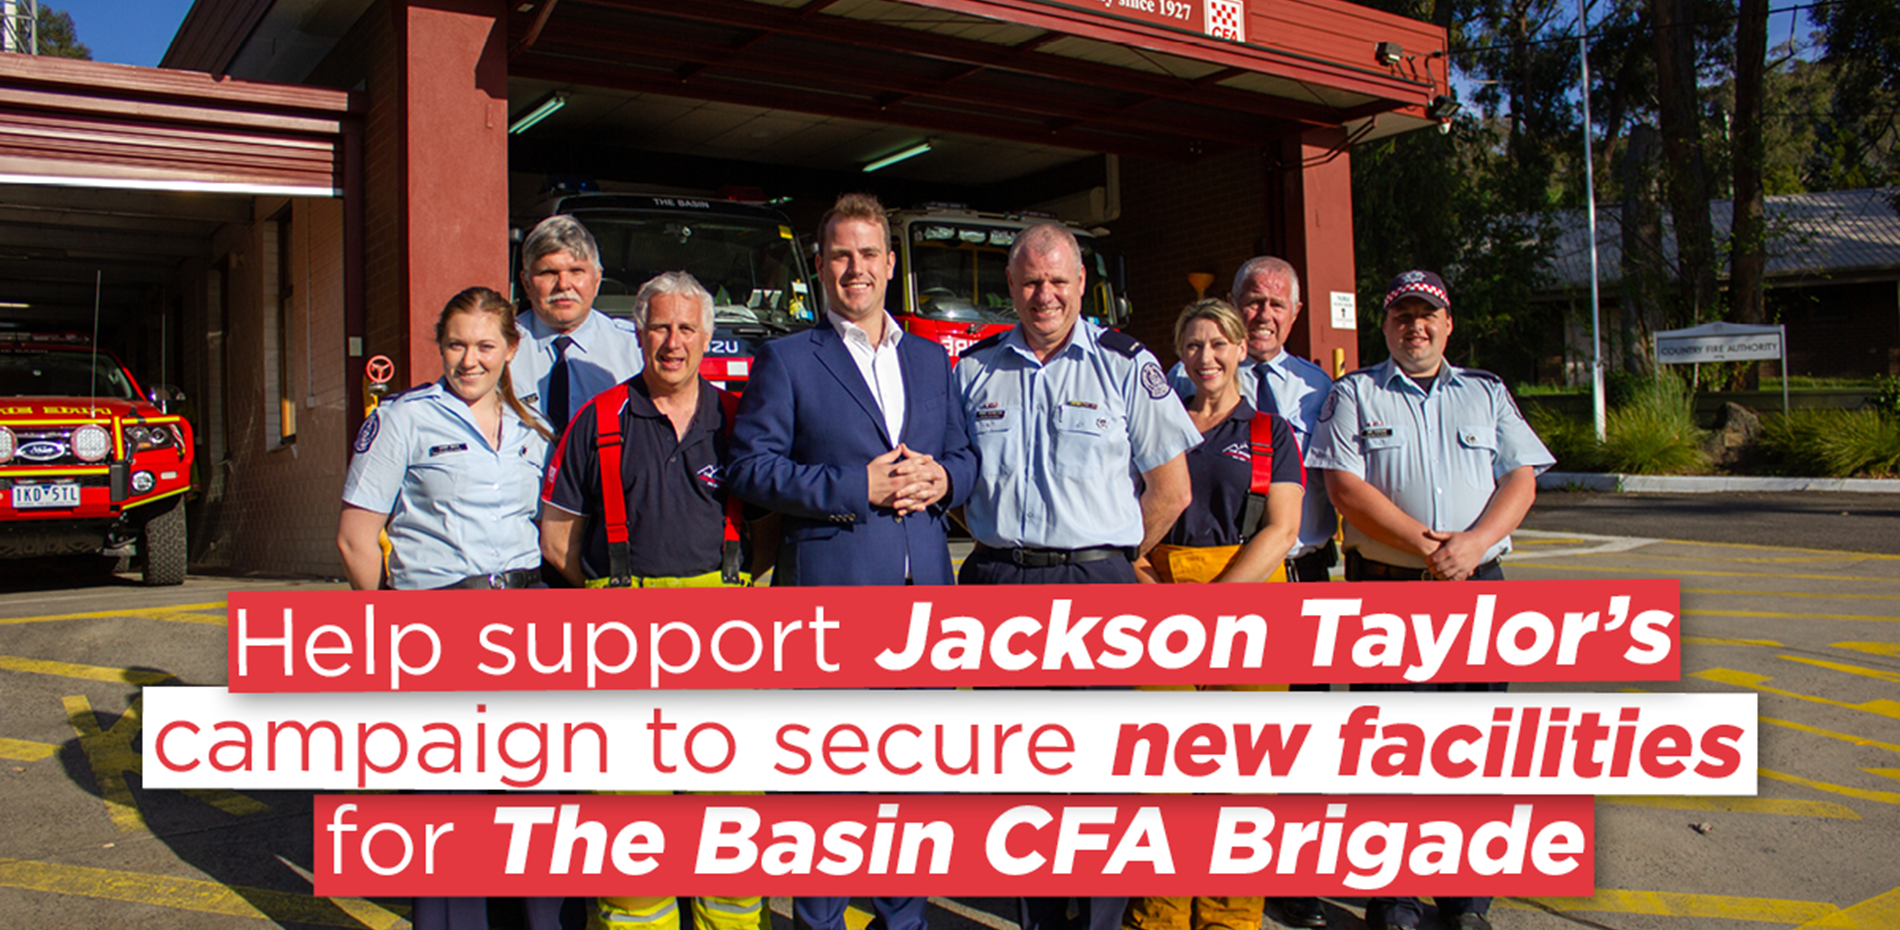 PETITION FOR NEW FACILITIES FOR THE BASIN CFA  Main Image